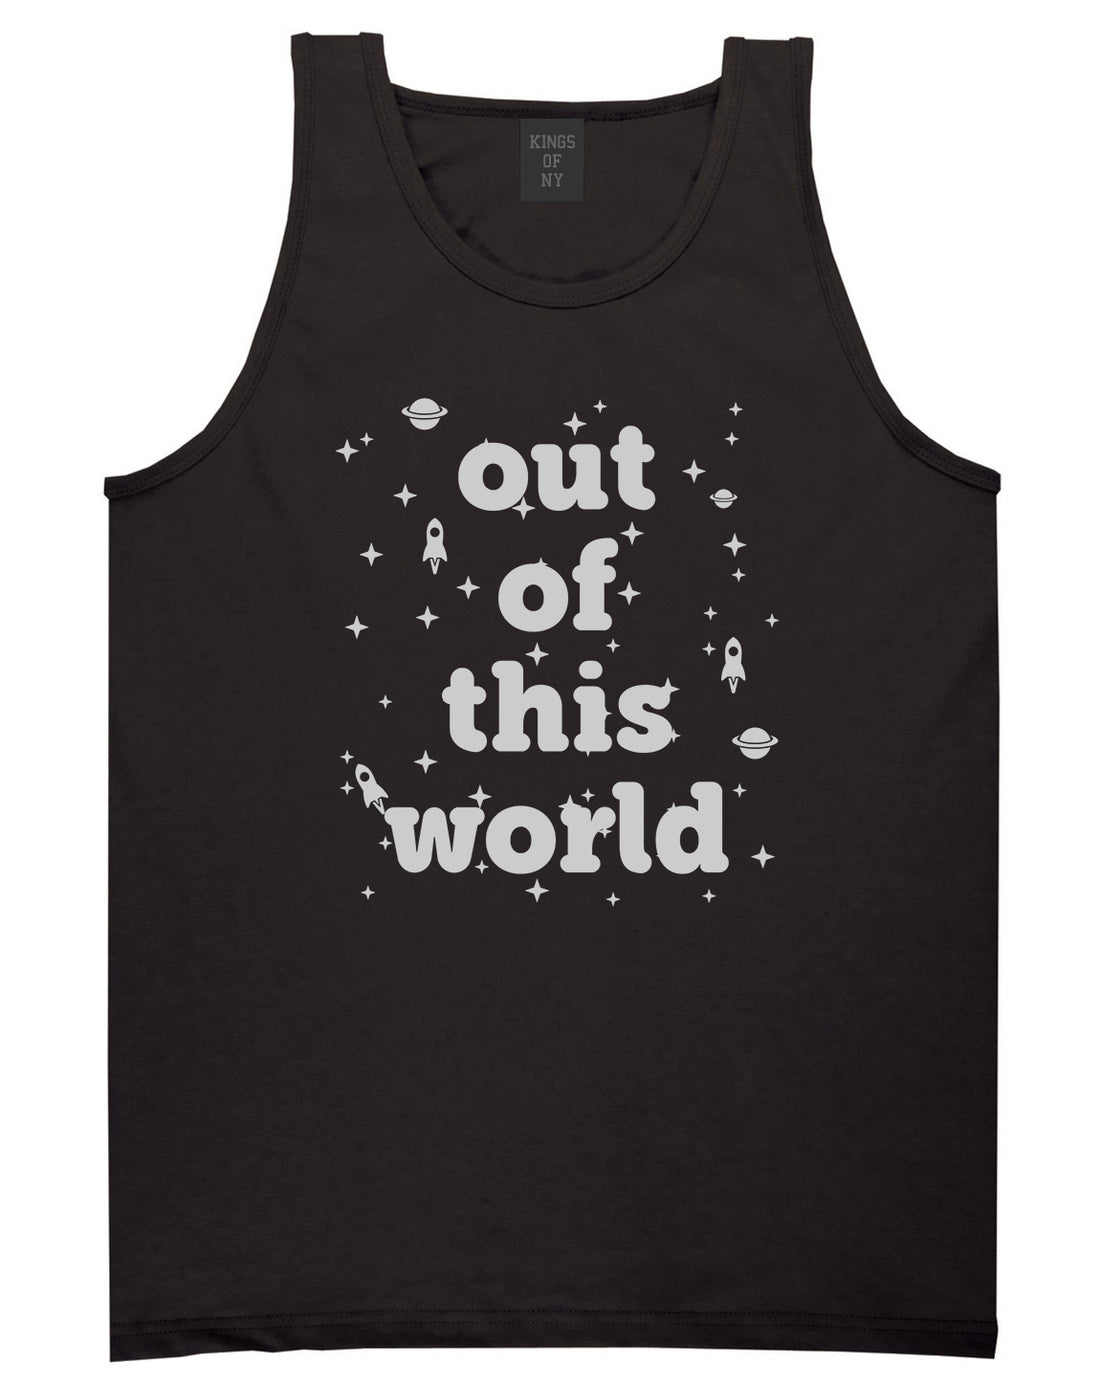 Out Of This World Space Galaxy Mens Tank Top Shirt Black by Kings Of NY